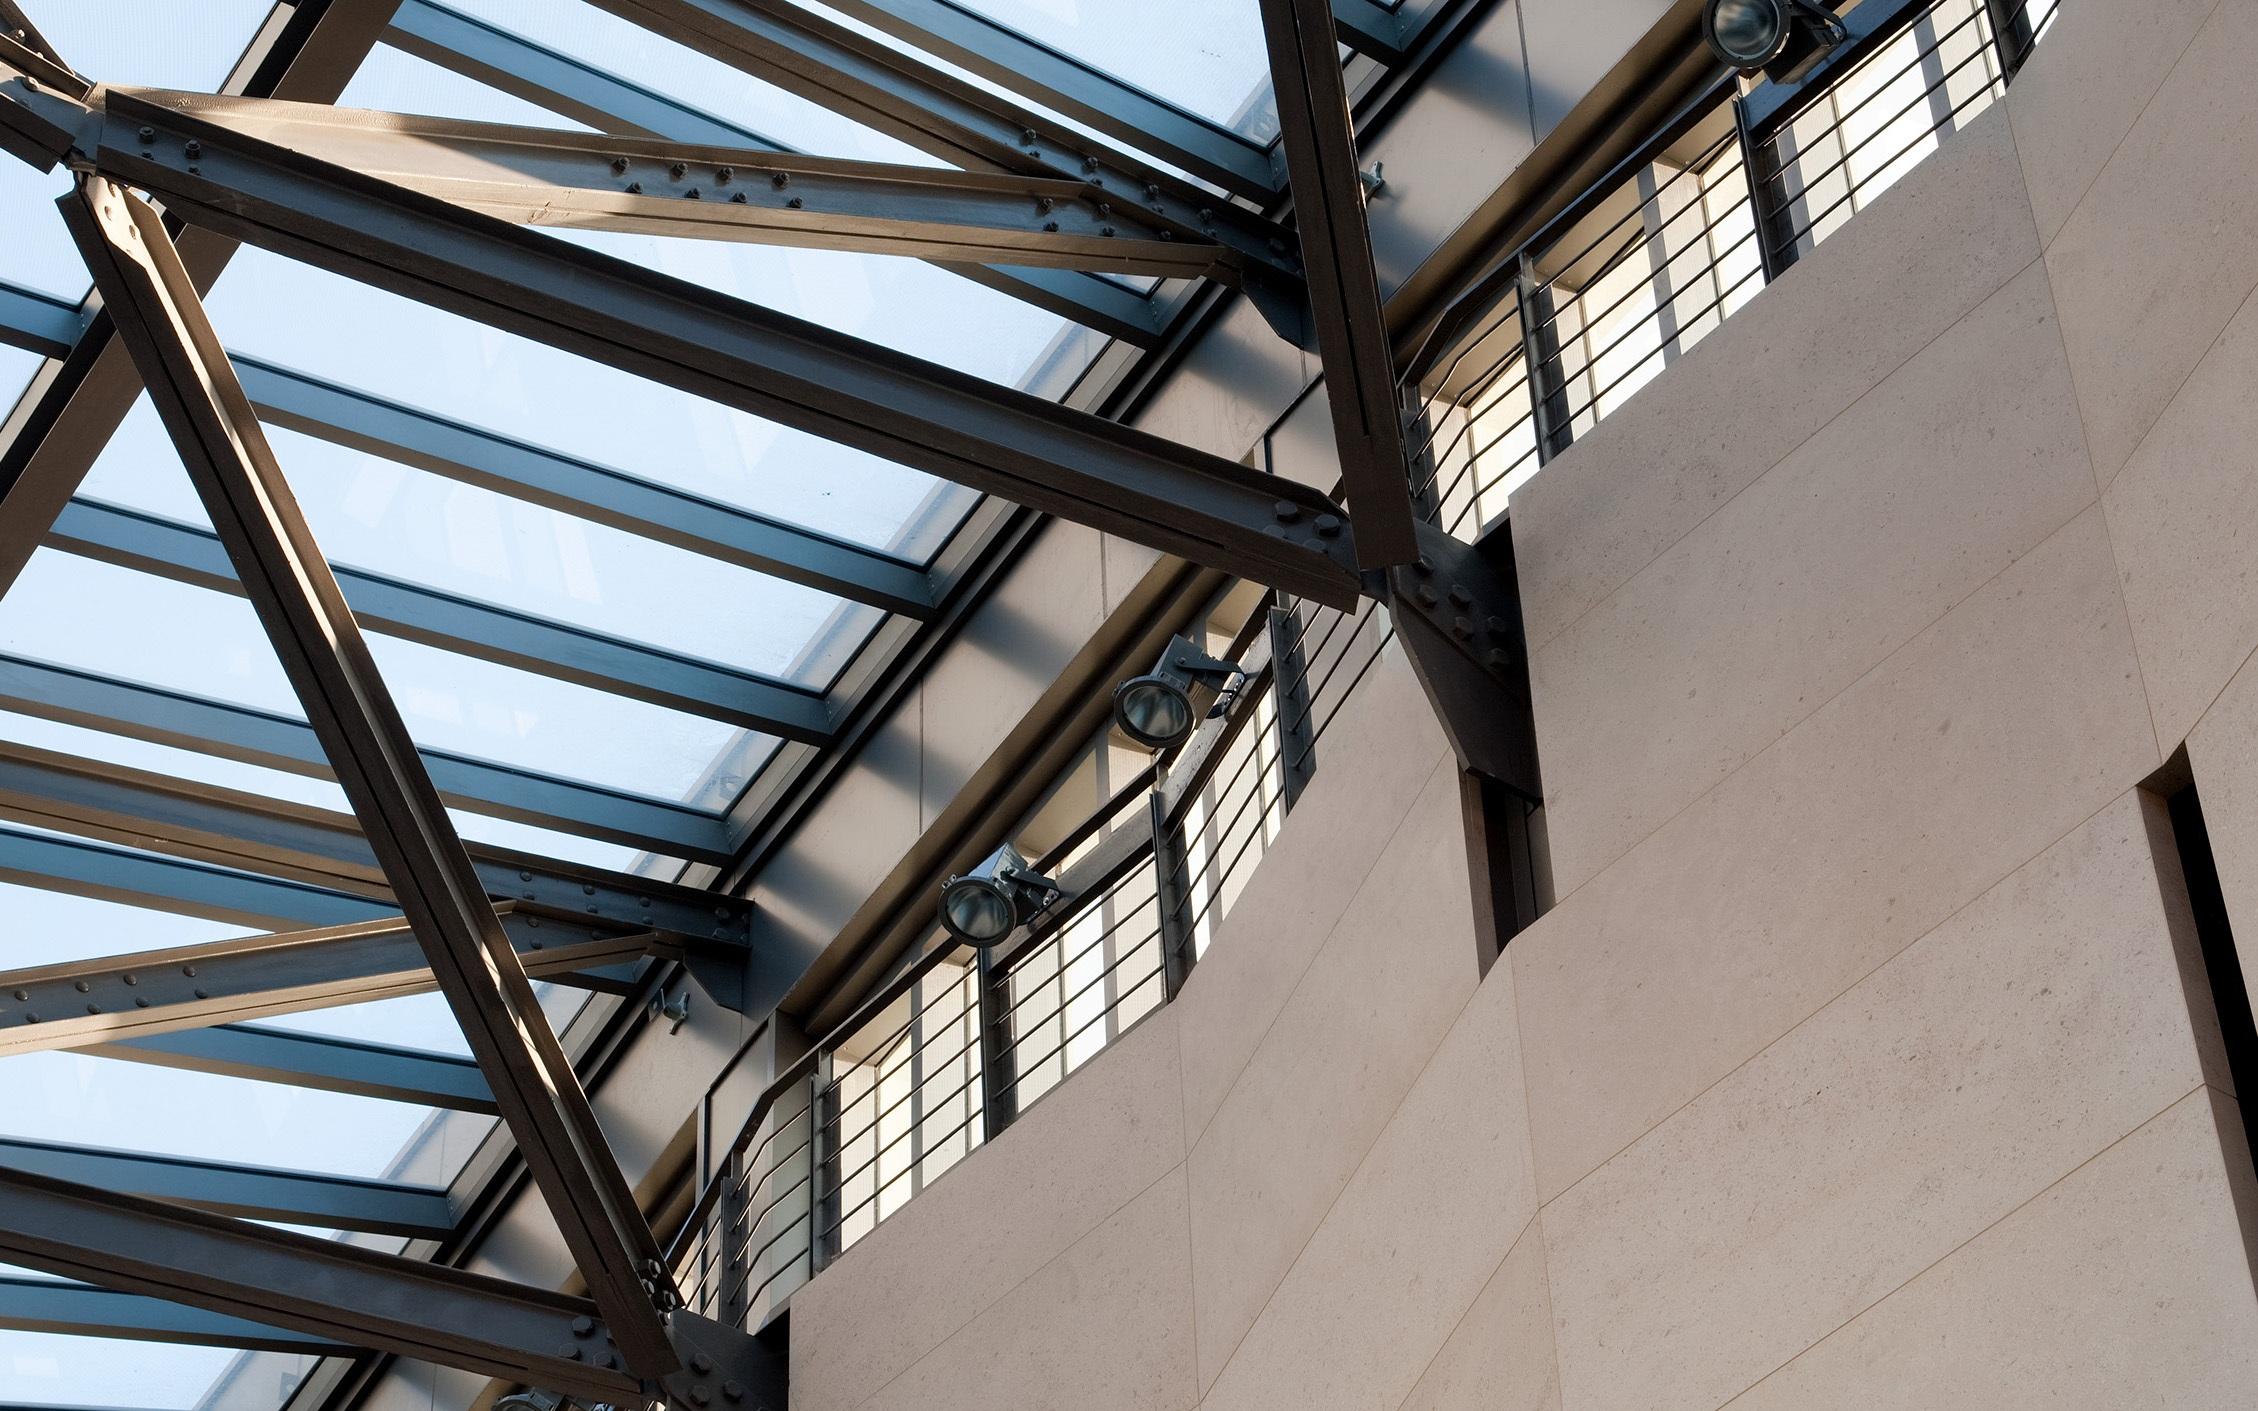 The glass ceiling brings light into the transit facility